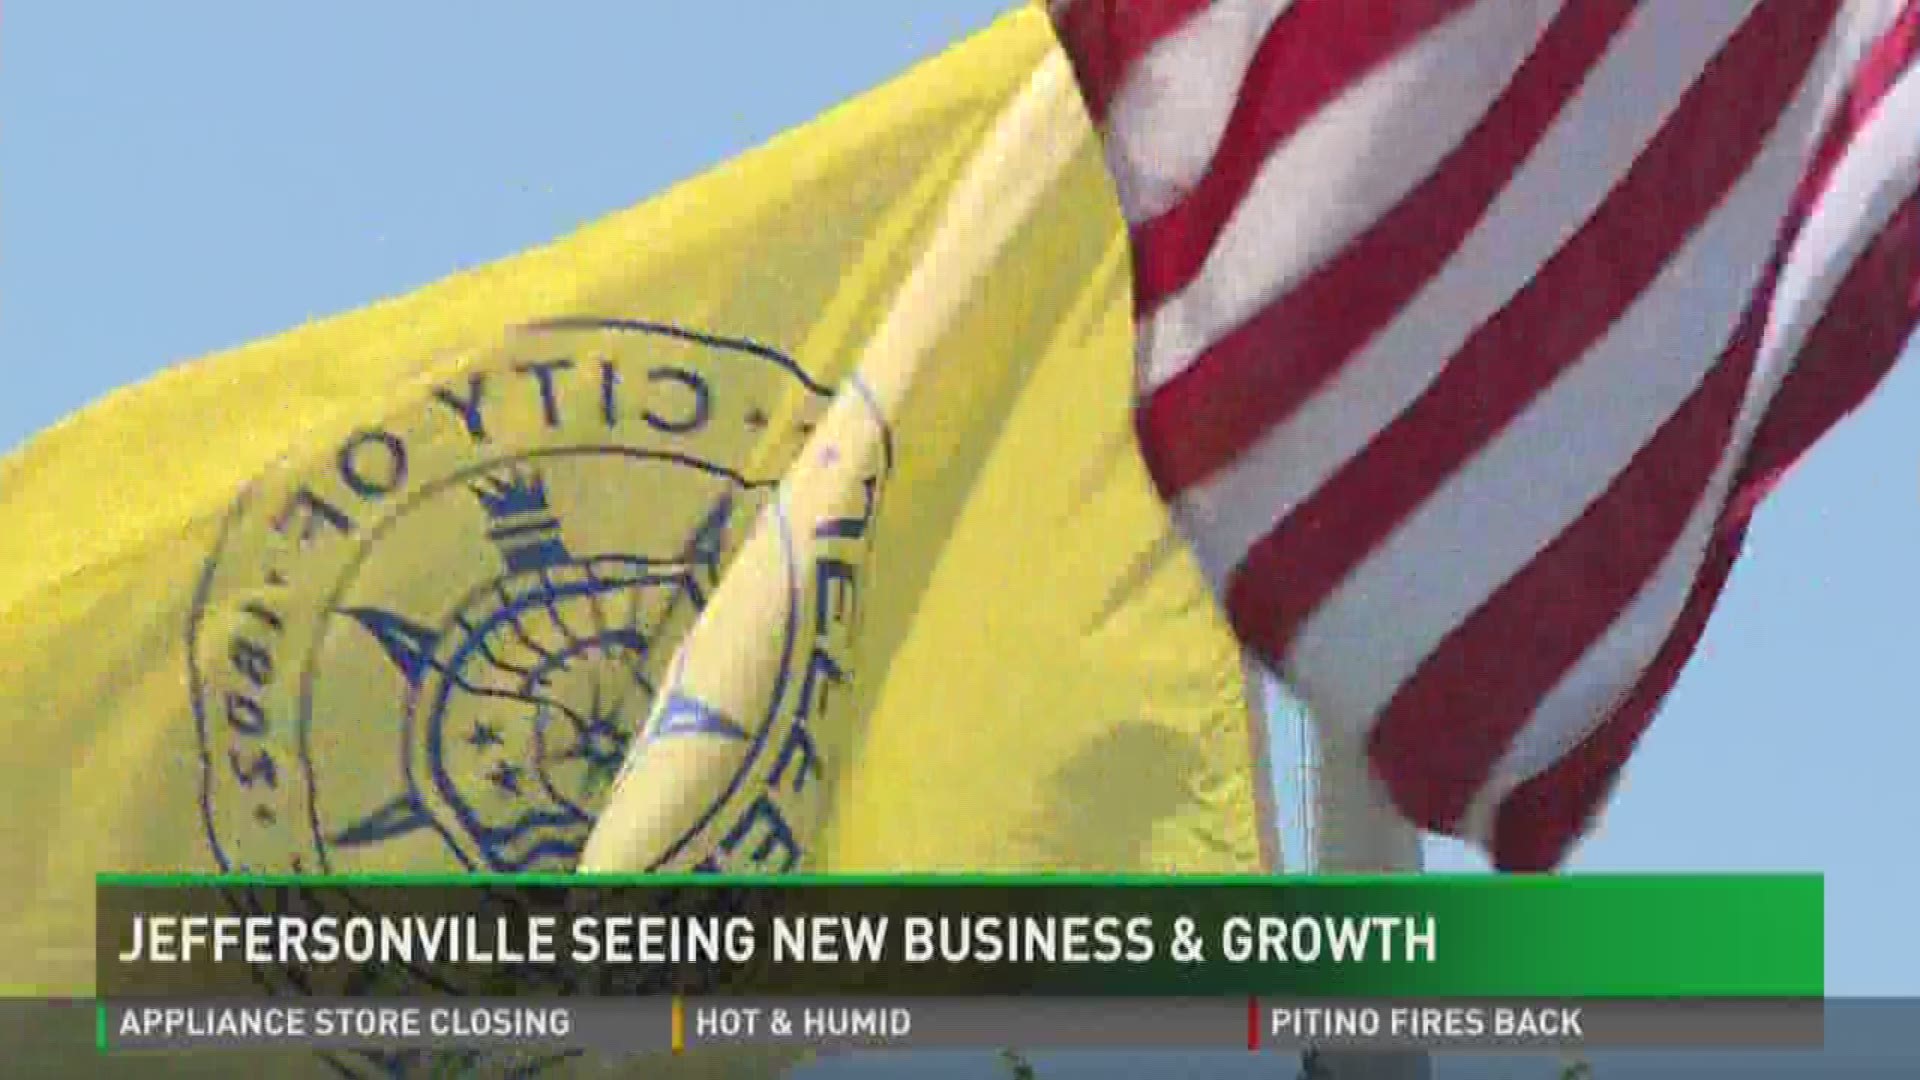 Jeffersonville seeing new business and growth